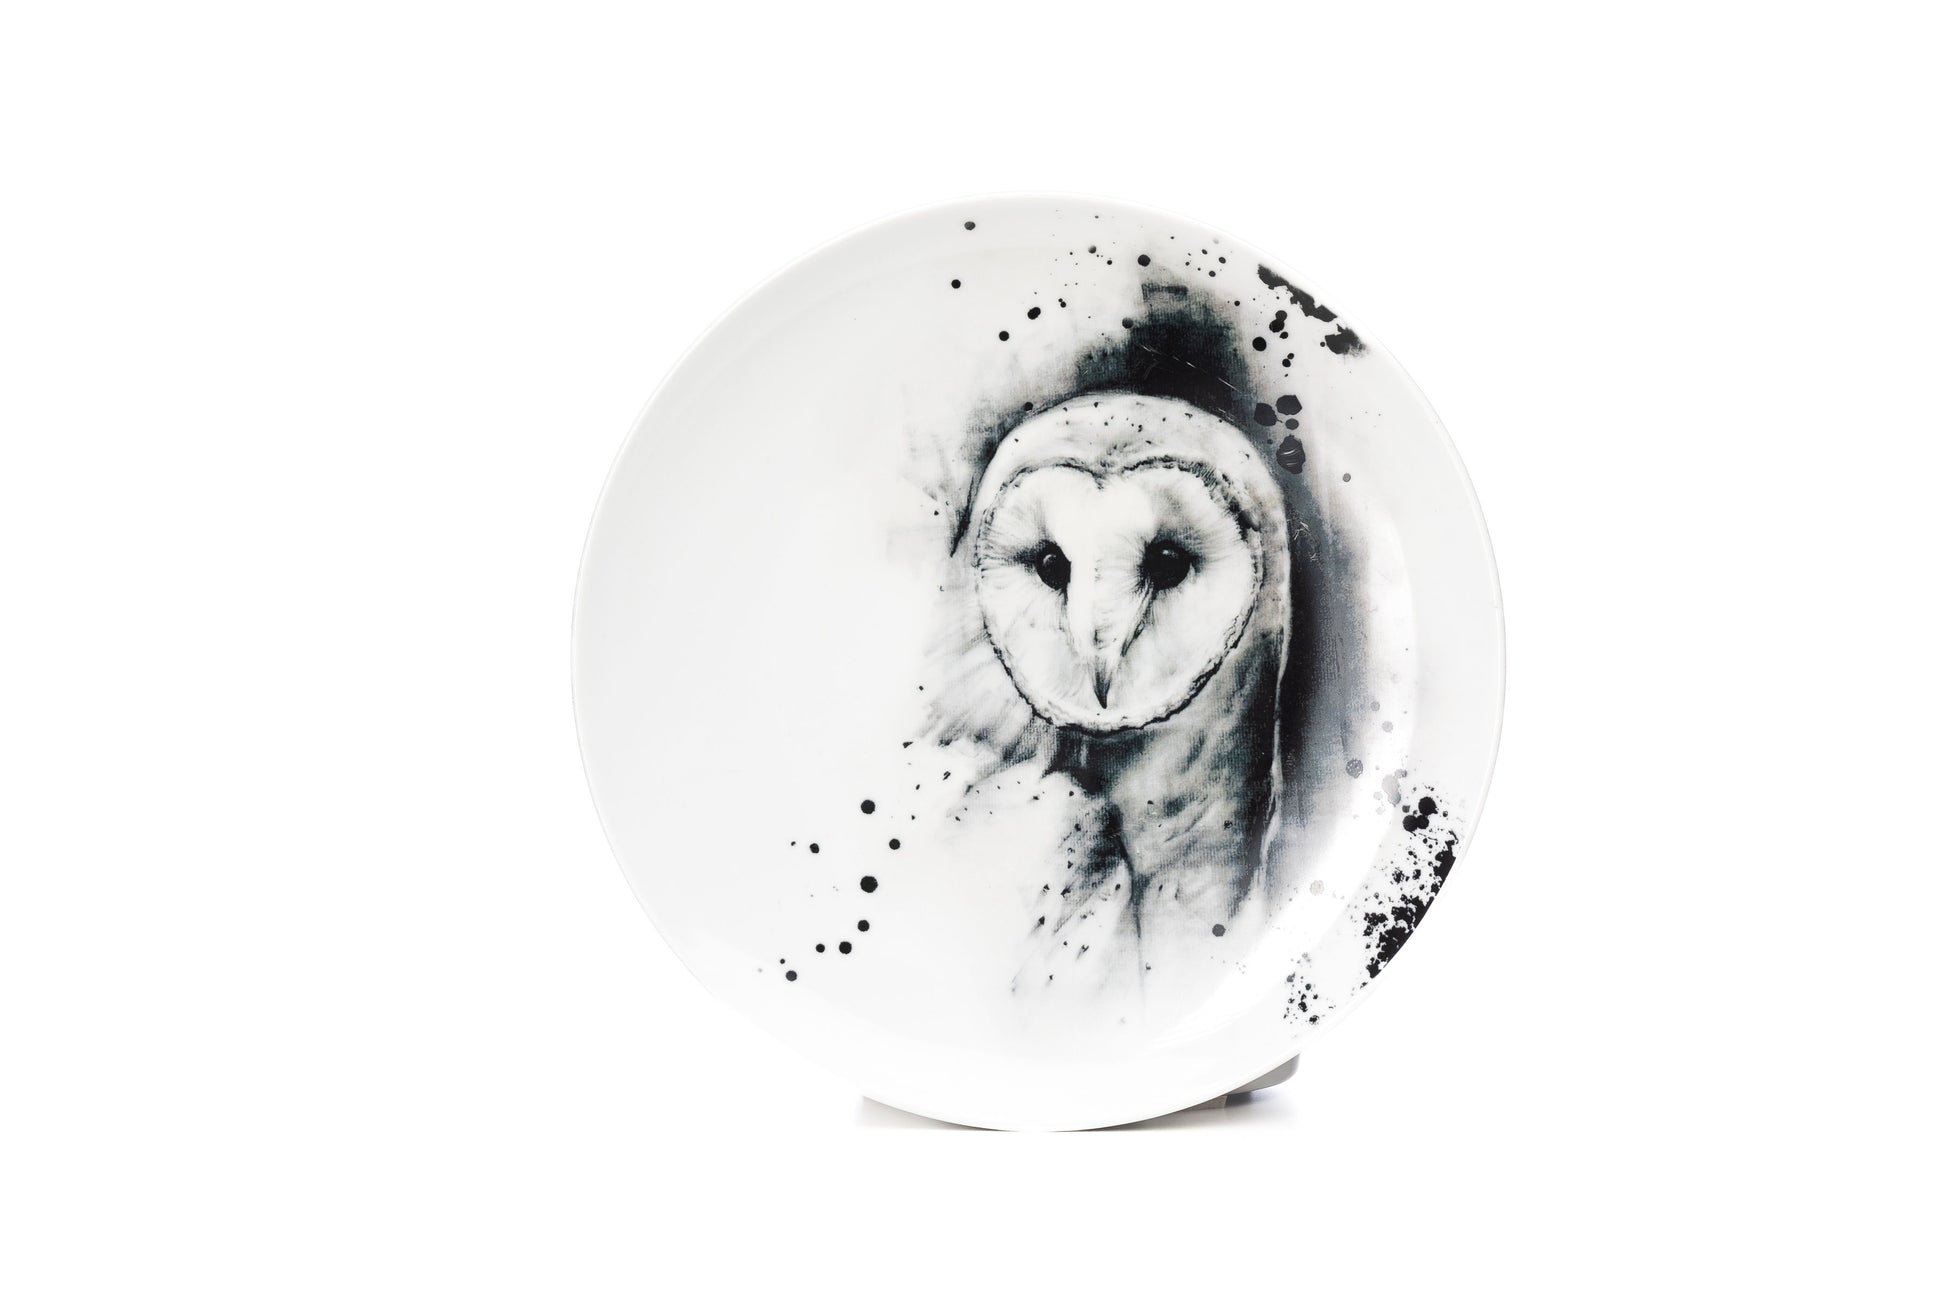 11" White porcelain dinner plate microwave and dishwasher safe with Barn Owl illustration and black ink splatter product photo on white background